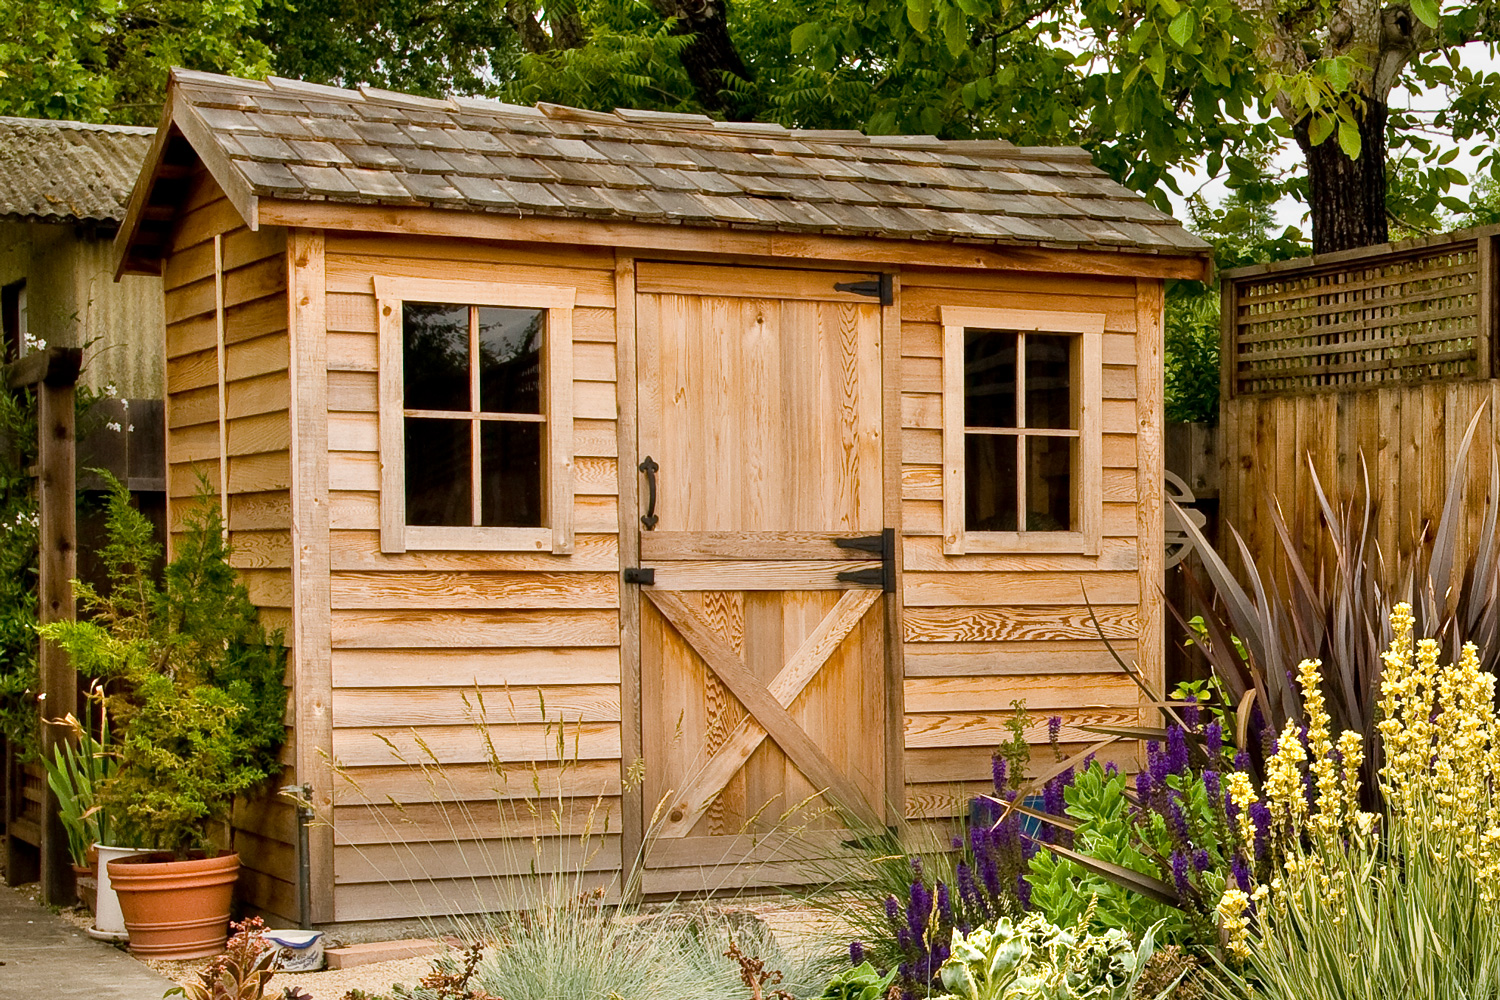 Wooden garden shed in a garden with flowers.